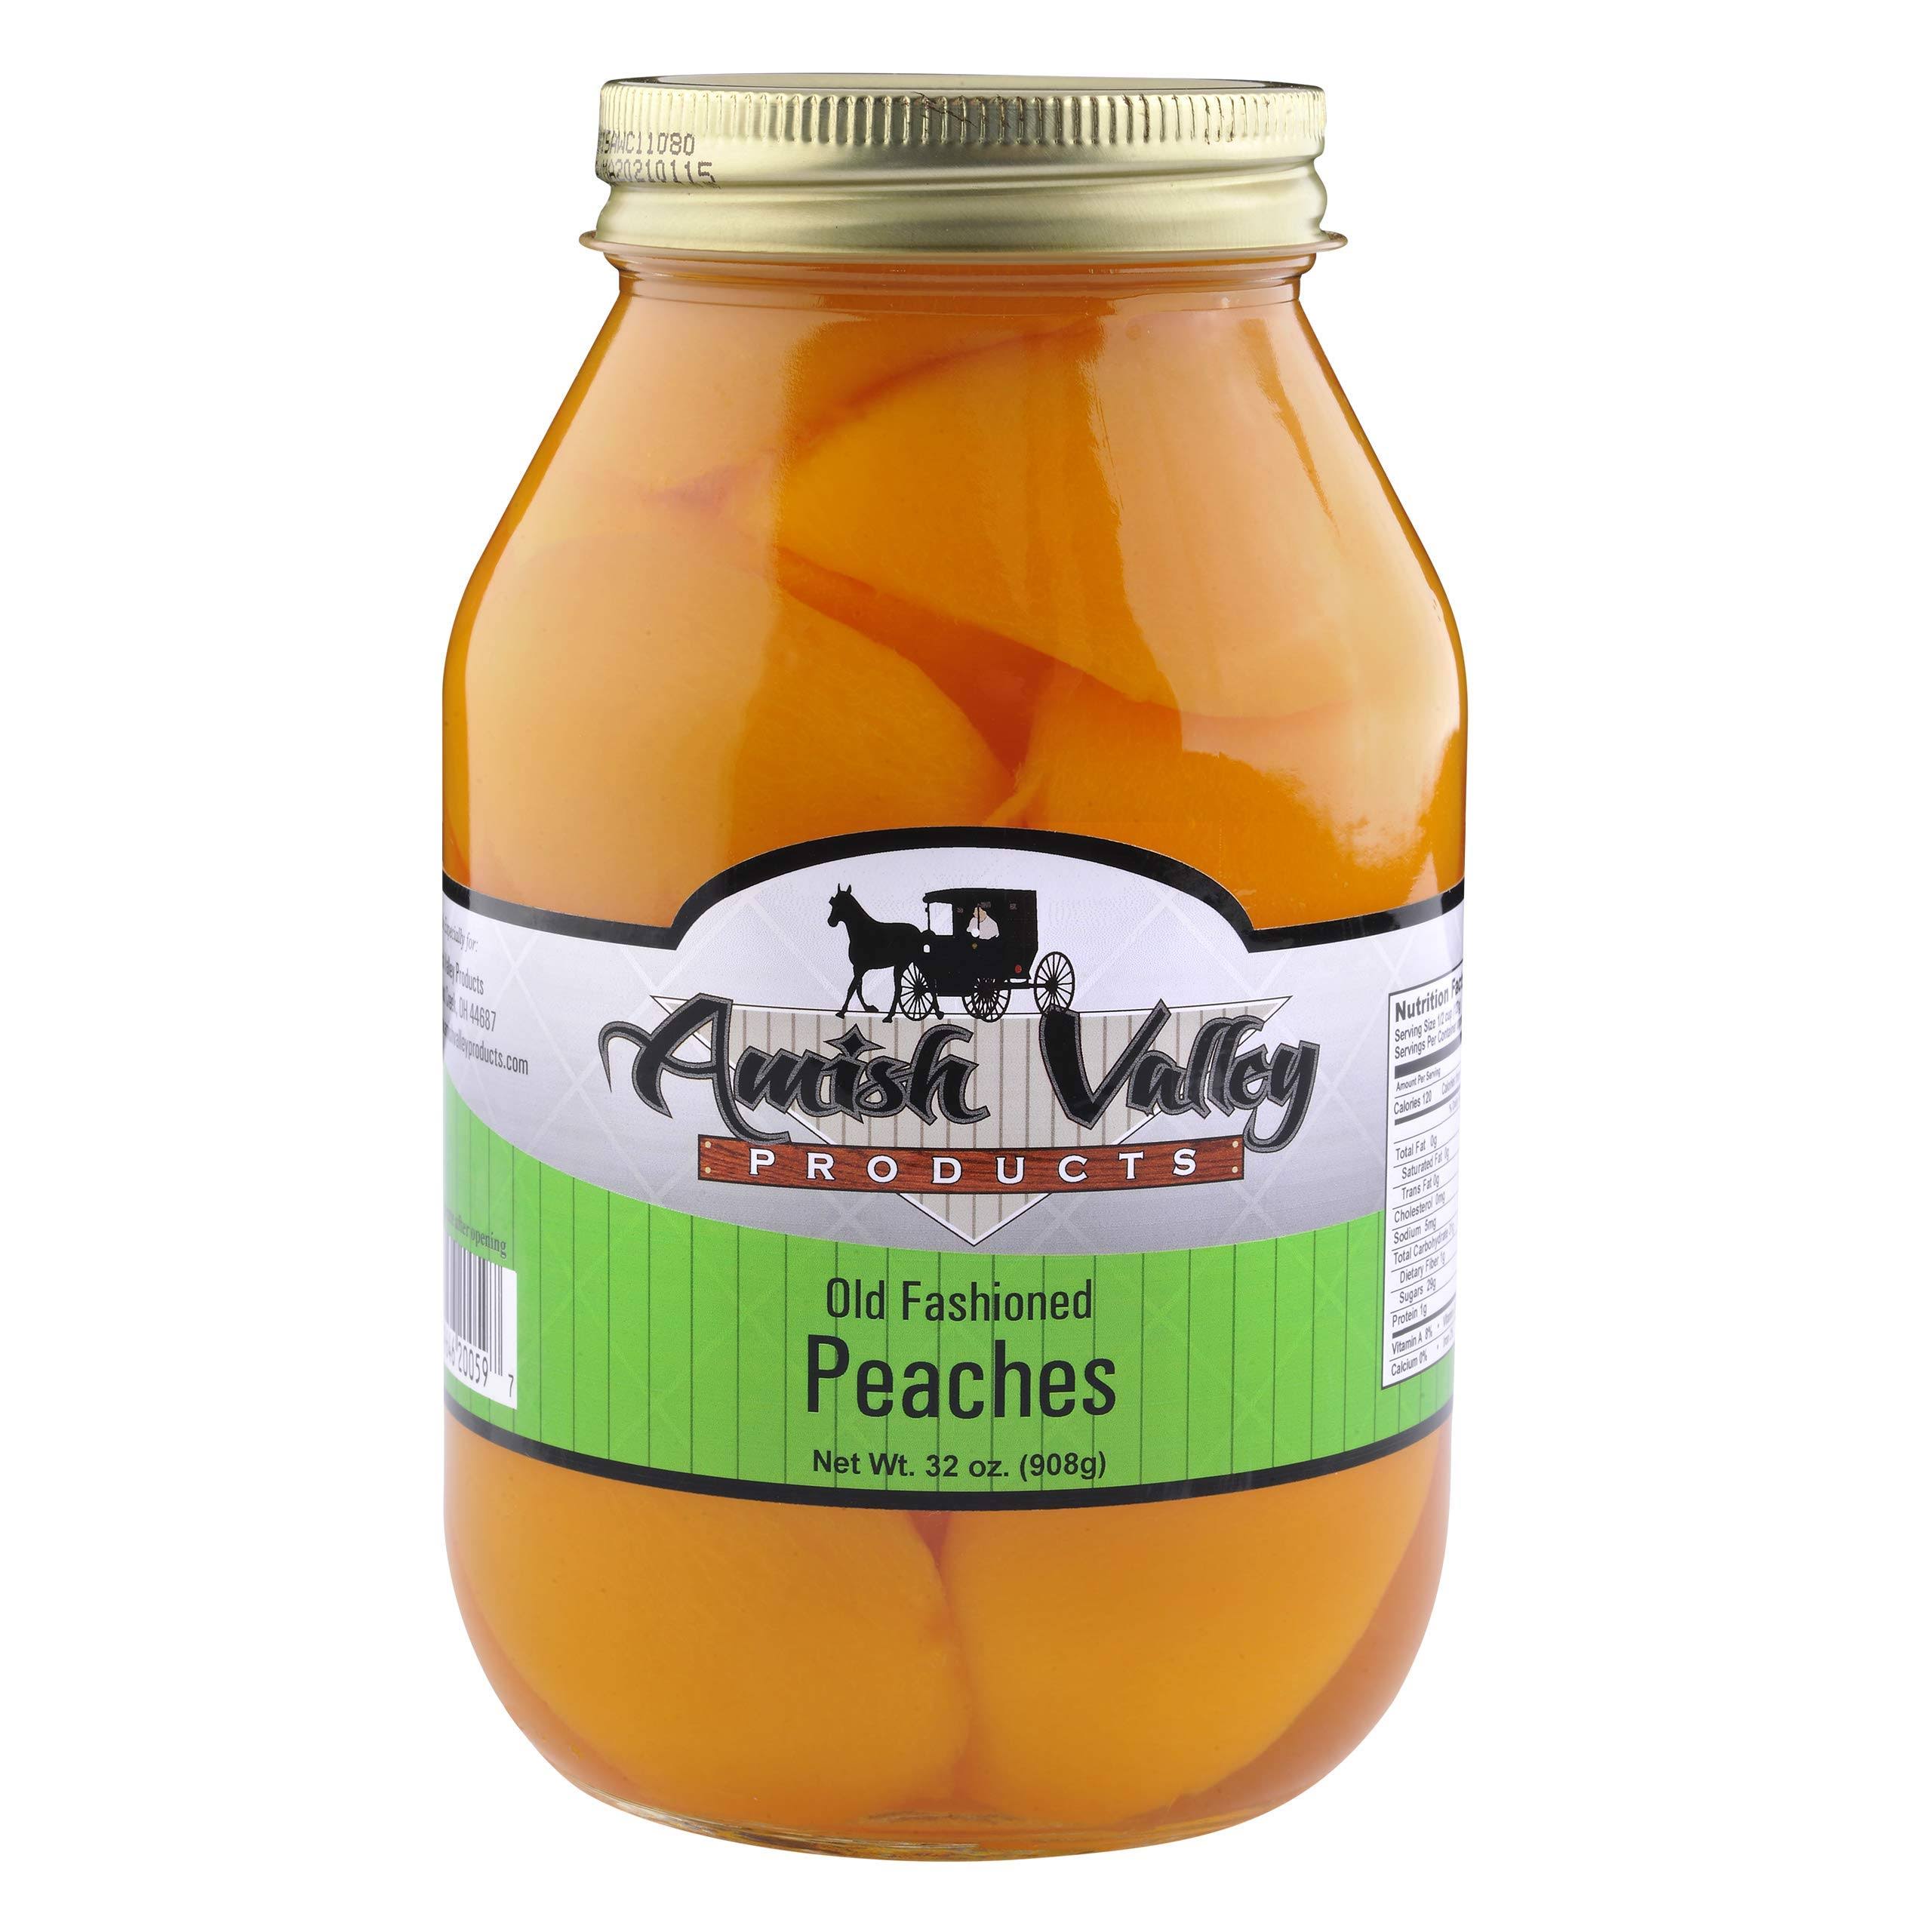 Amish Valley Products Old Fashioned Peaches Halves Canned Jarred in 32 oz Glass Jar (1 Quart Jar - 32 oz)